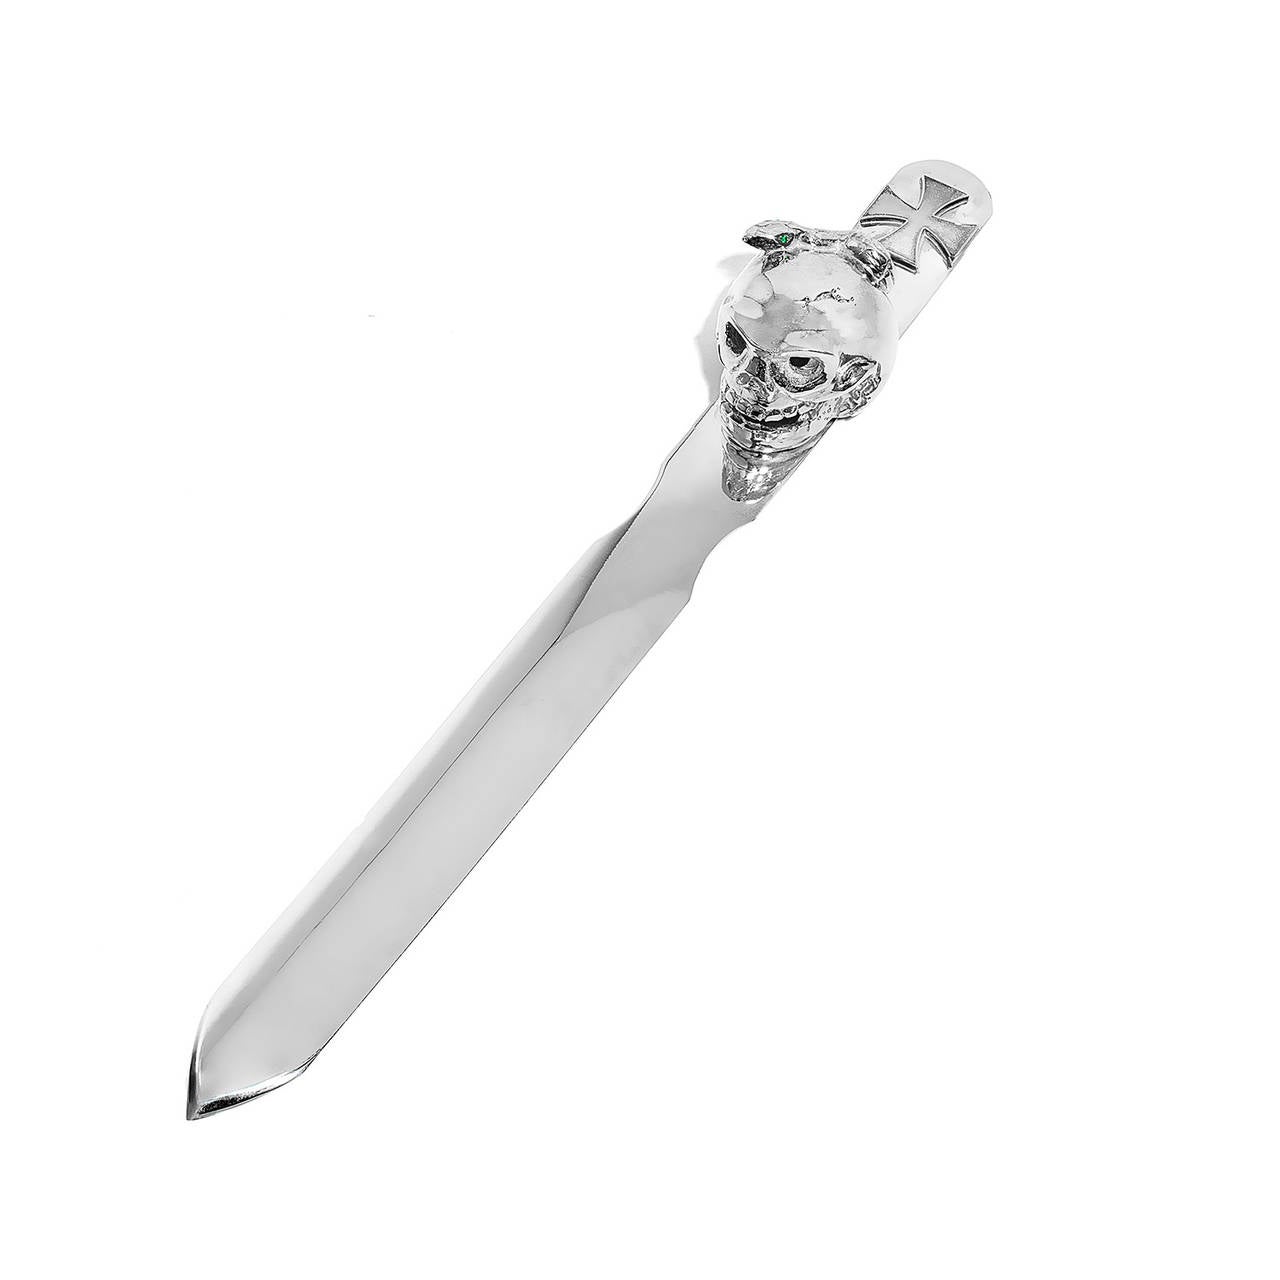 Sterling Silver letter opener featuring a Skull and snake with emerald eyes by Renato Cipullo.
A sculpture for your desk!